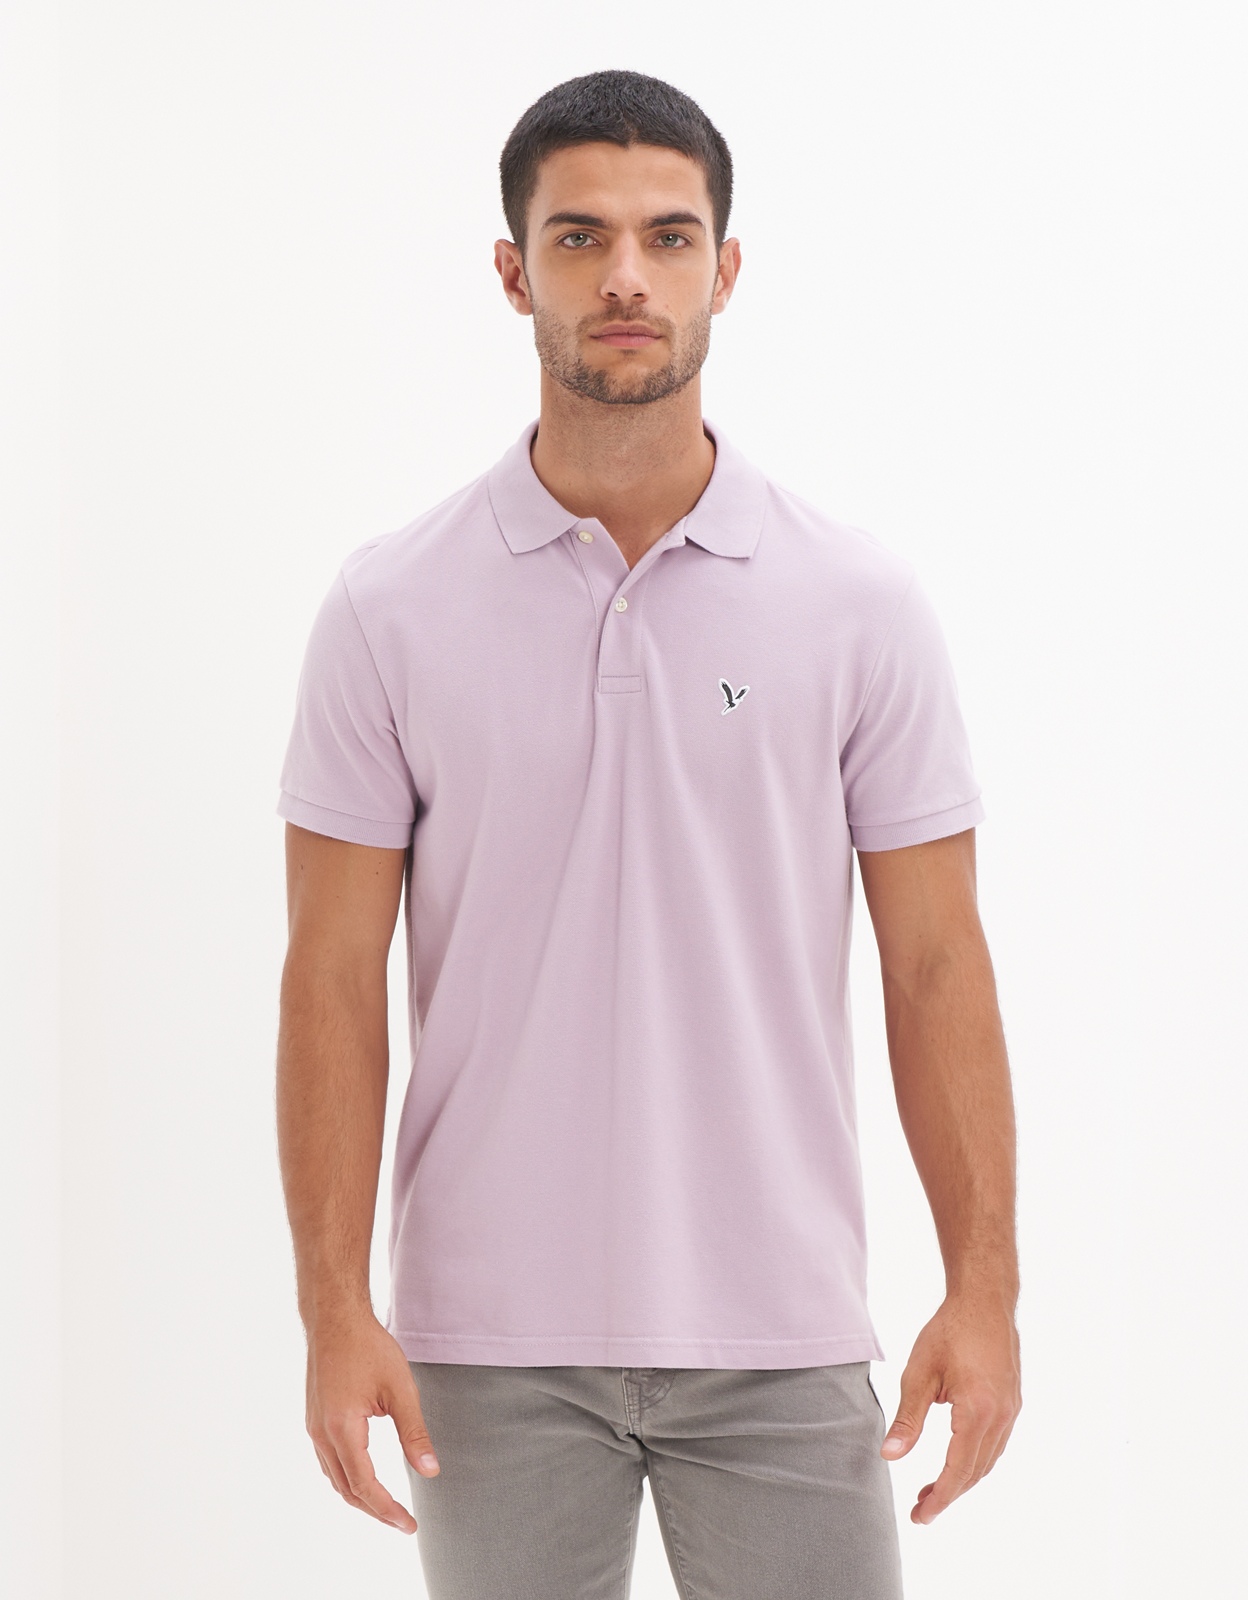 Shop AE Polo Shirt online | American Eagle Outfitters Egypt